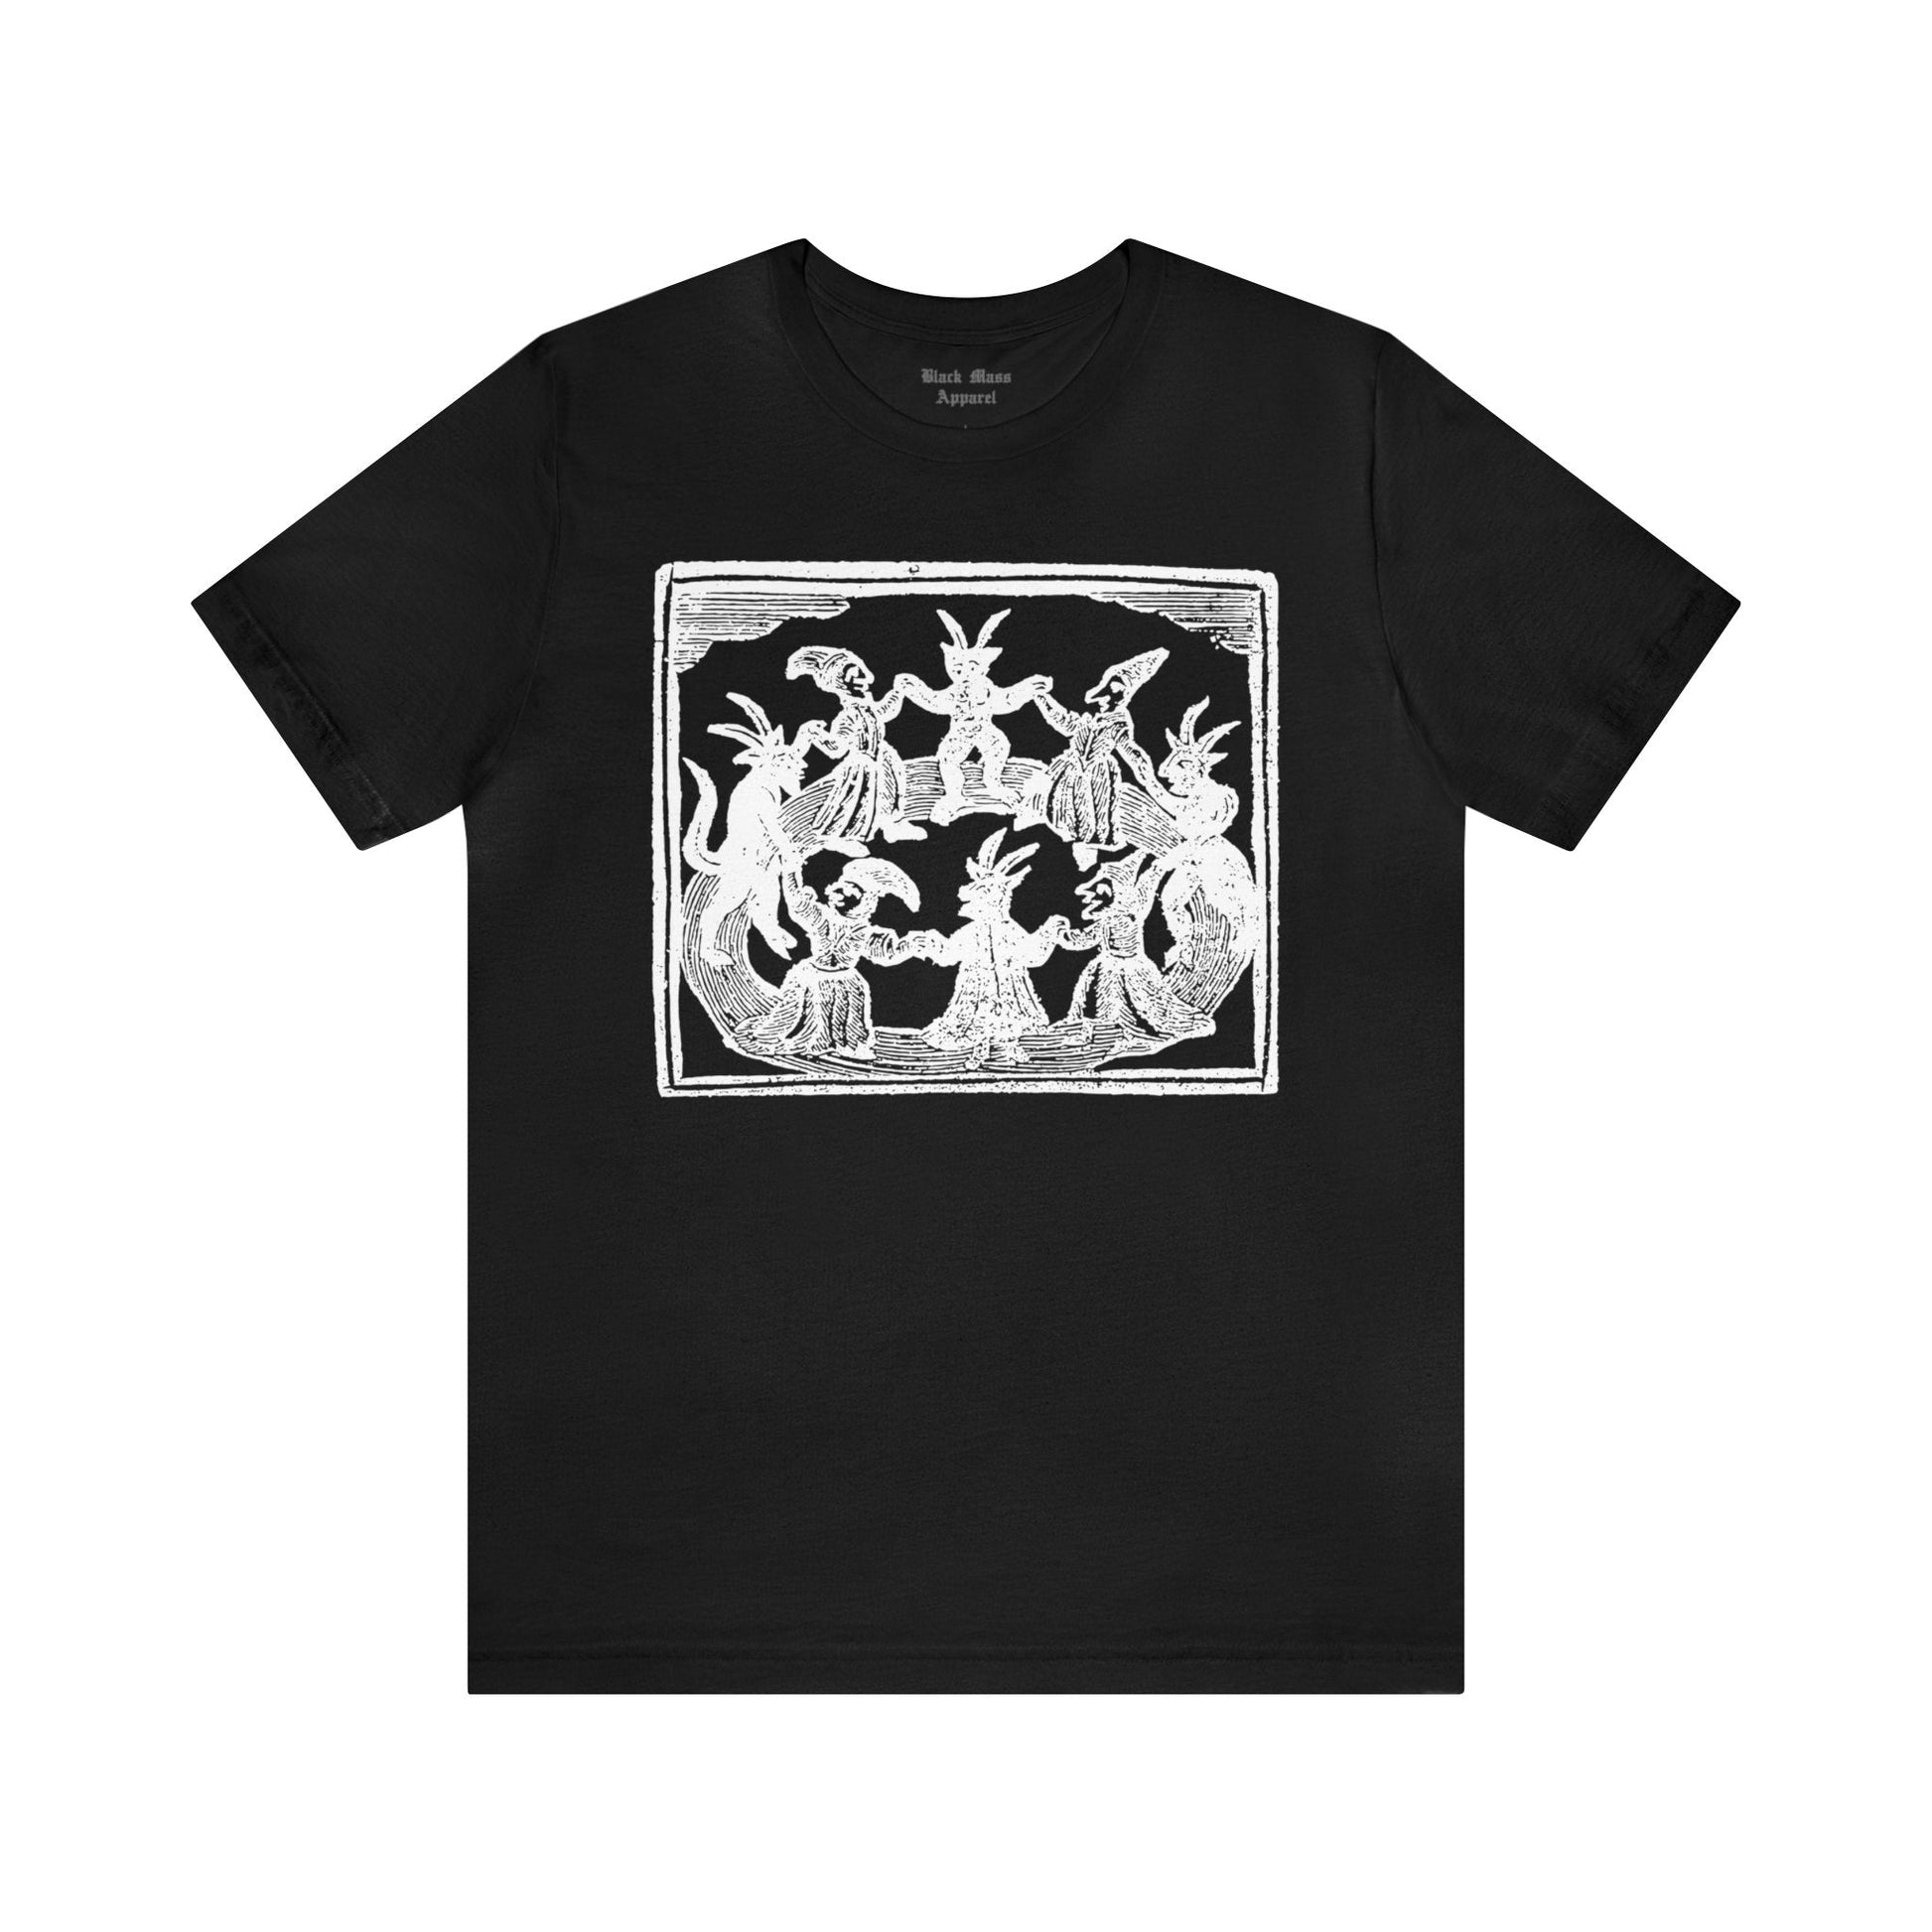 Witches and Wizards I - Black Mass Apparel - T-Shirt